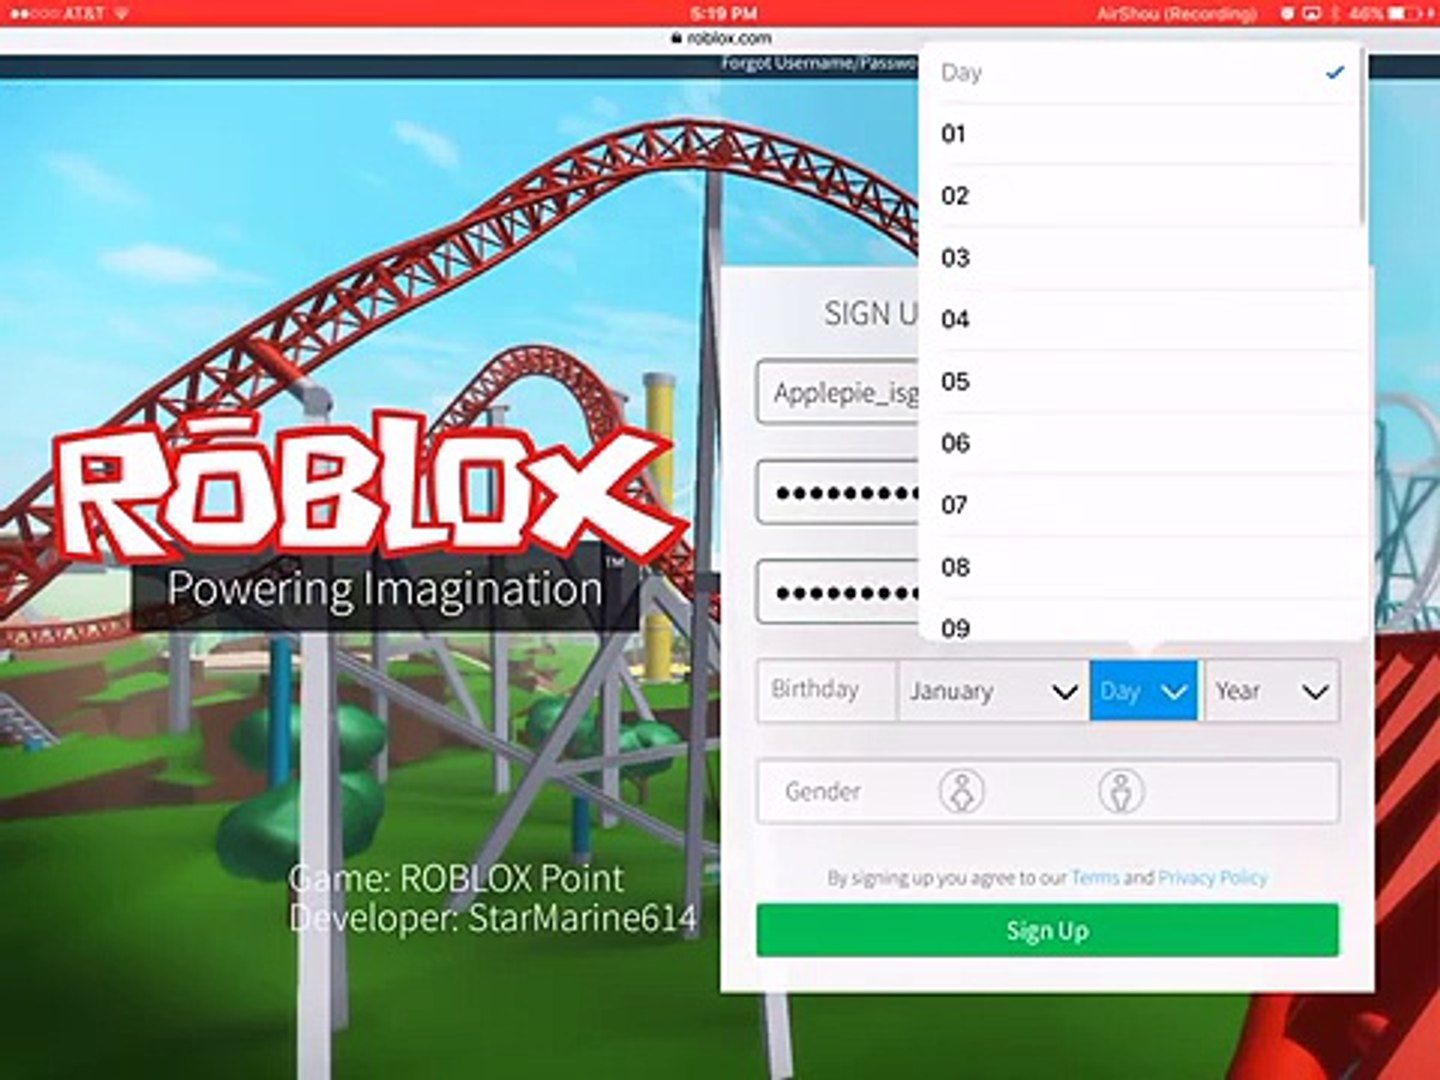 How To Make A Roblox Avatar Without Robux And Cute Also Thumbnail - how to make your avatar look cool on roblox for free without robux girls